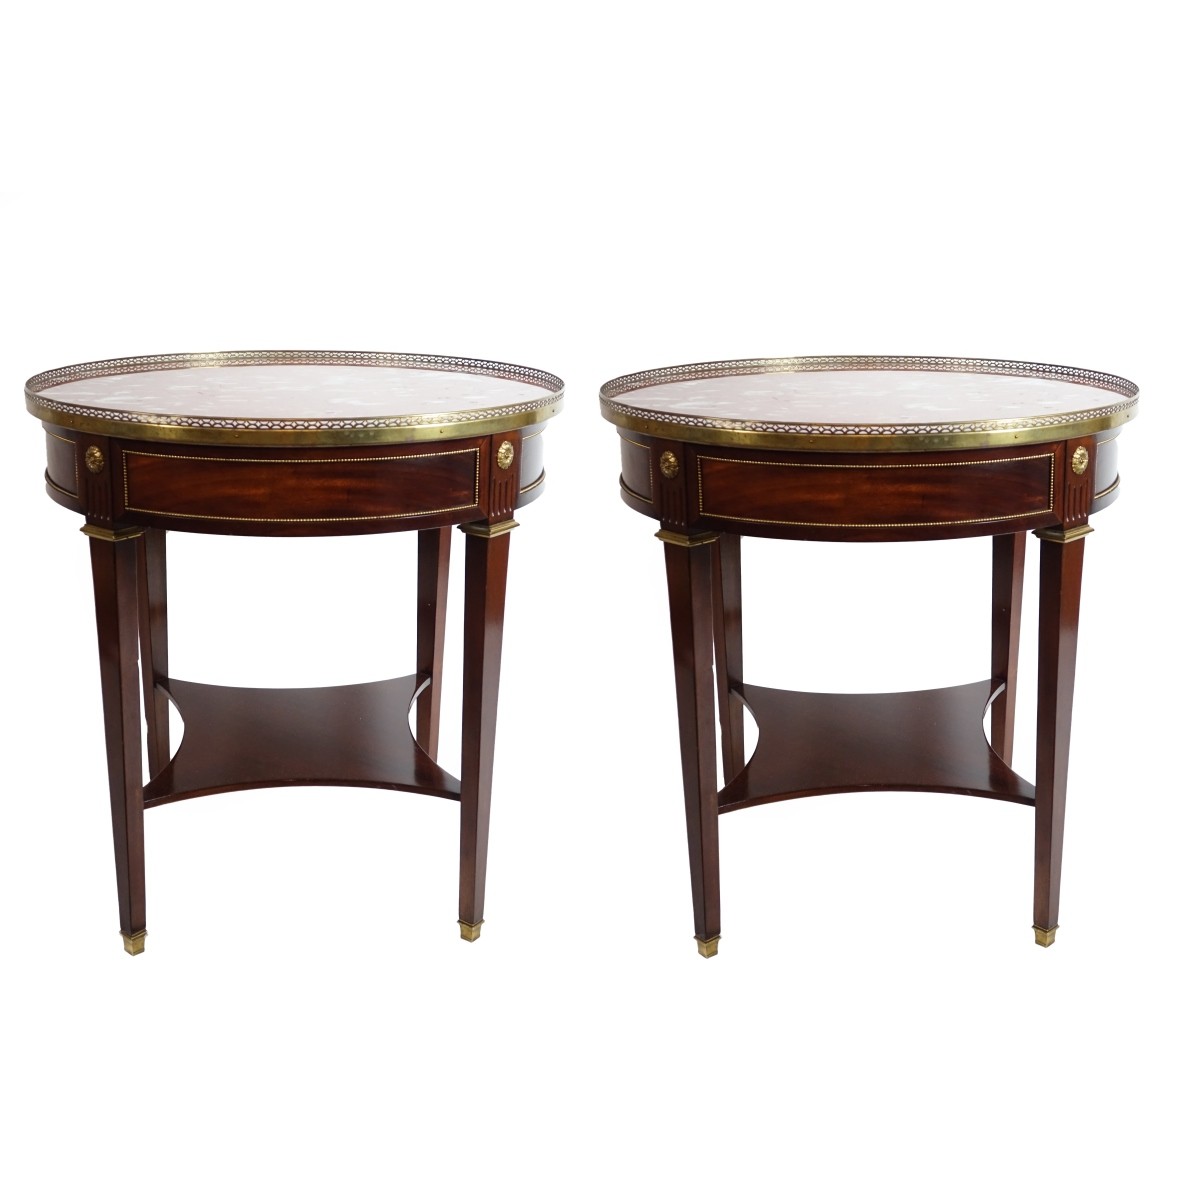 Pair of Louis XVI Style Round Side Tables